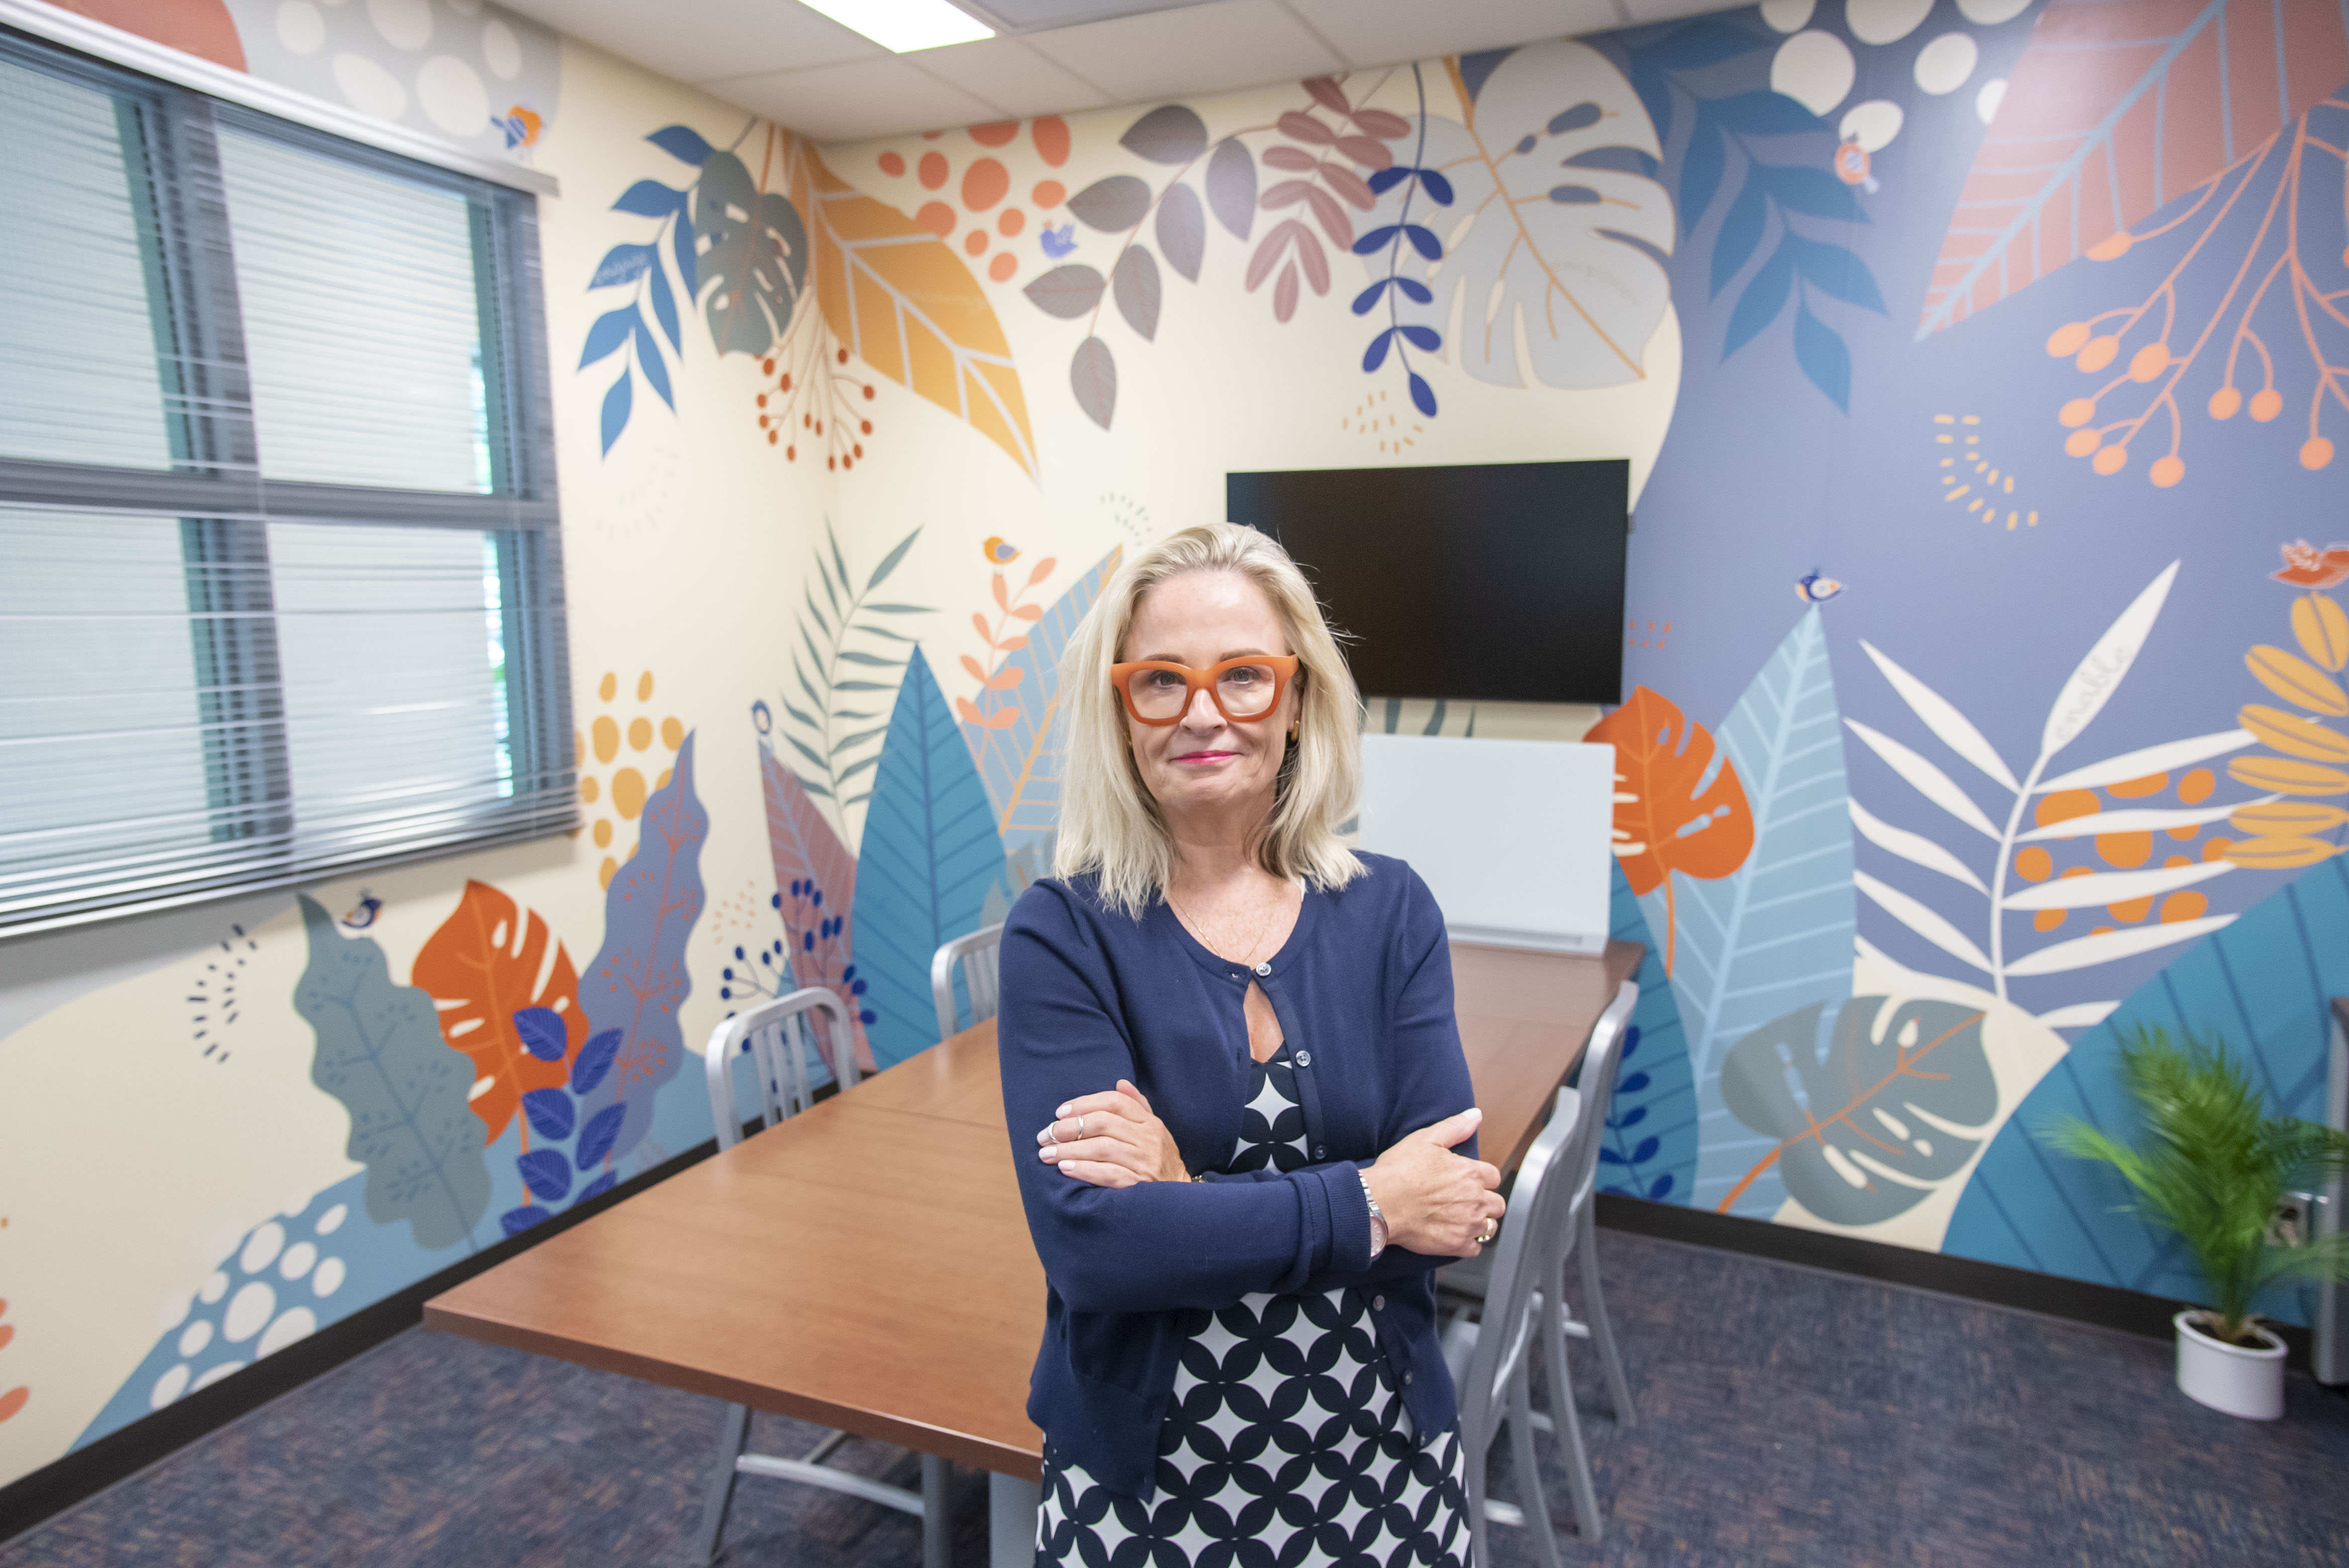 Deana McDonagh stands in the (dis)Ability Design Studio, a colorful mural creating a backdrop behind her.